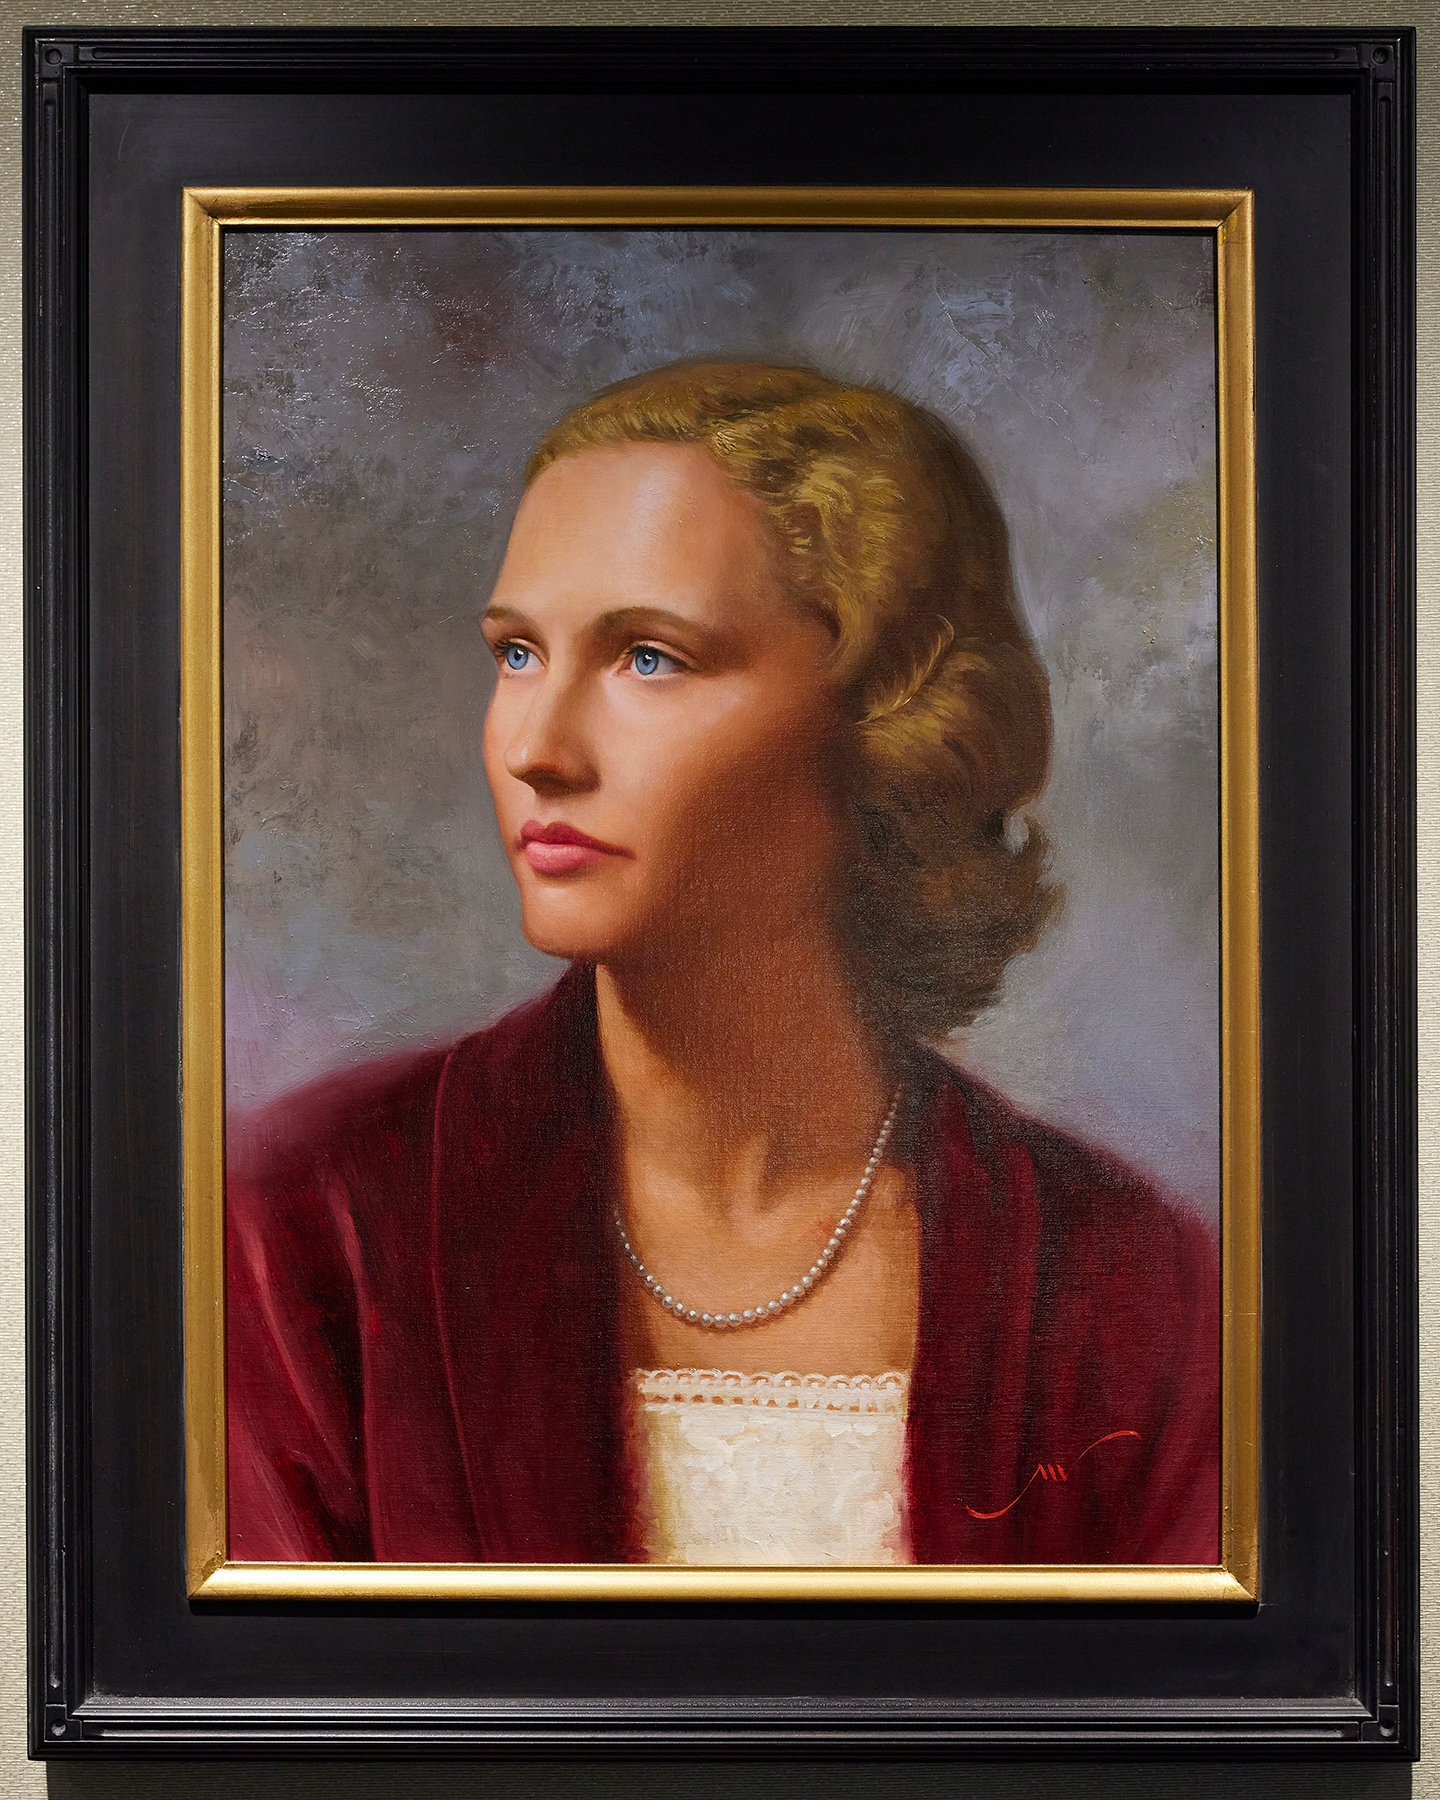 Portrait of a woman with blonde hair wearing a white shirt and red blazer